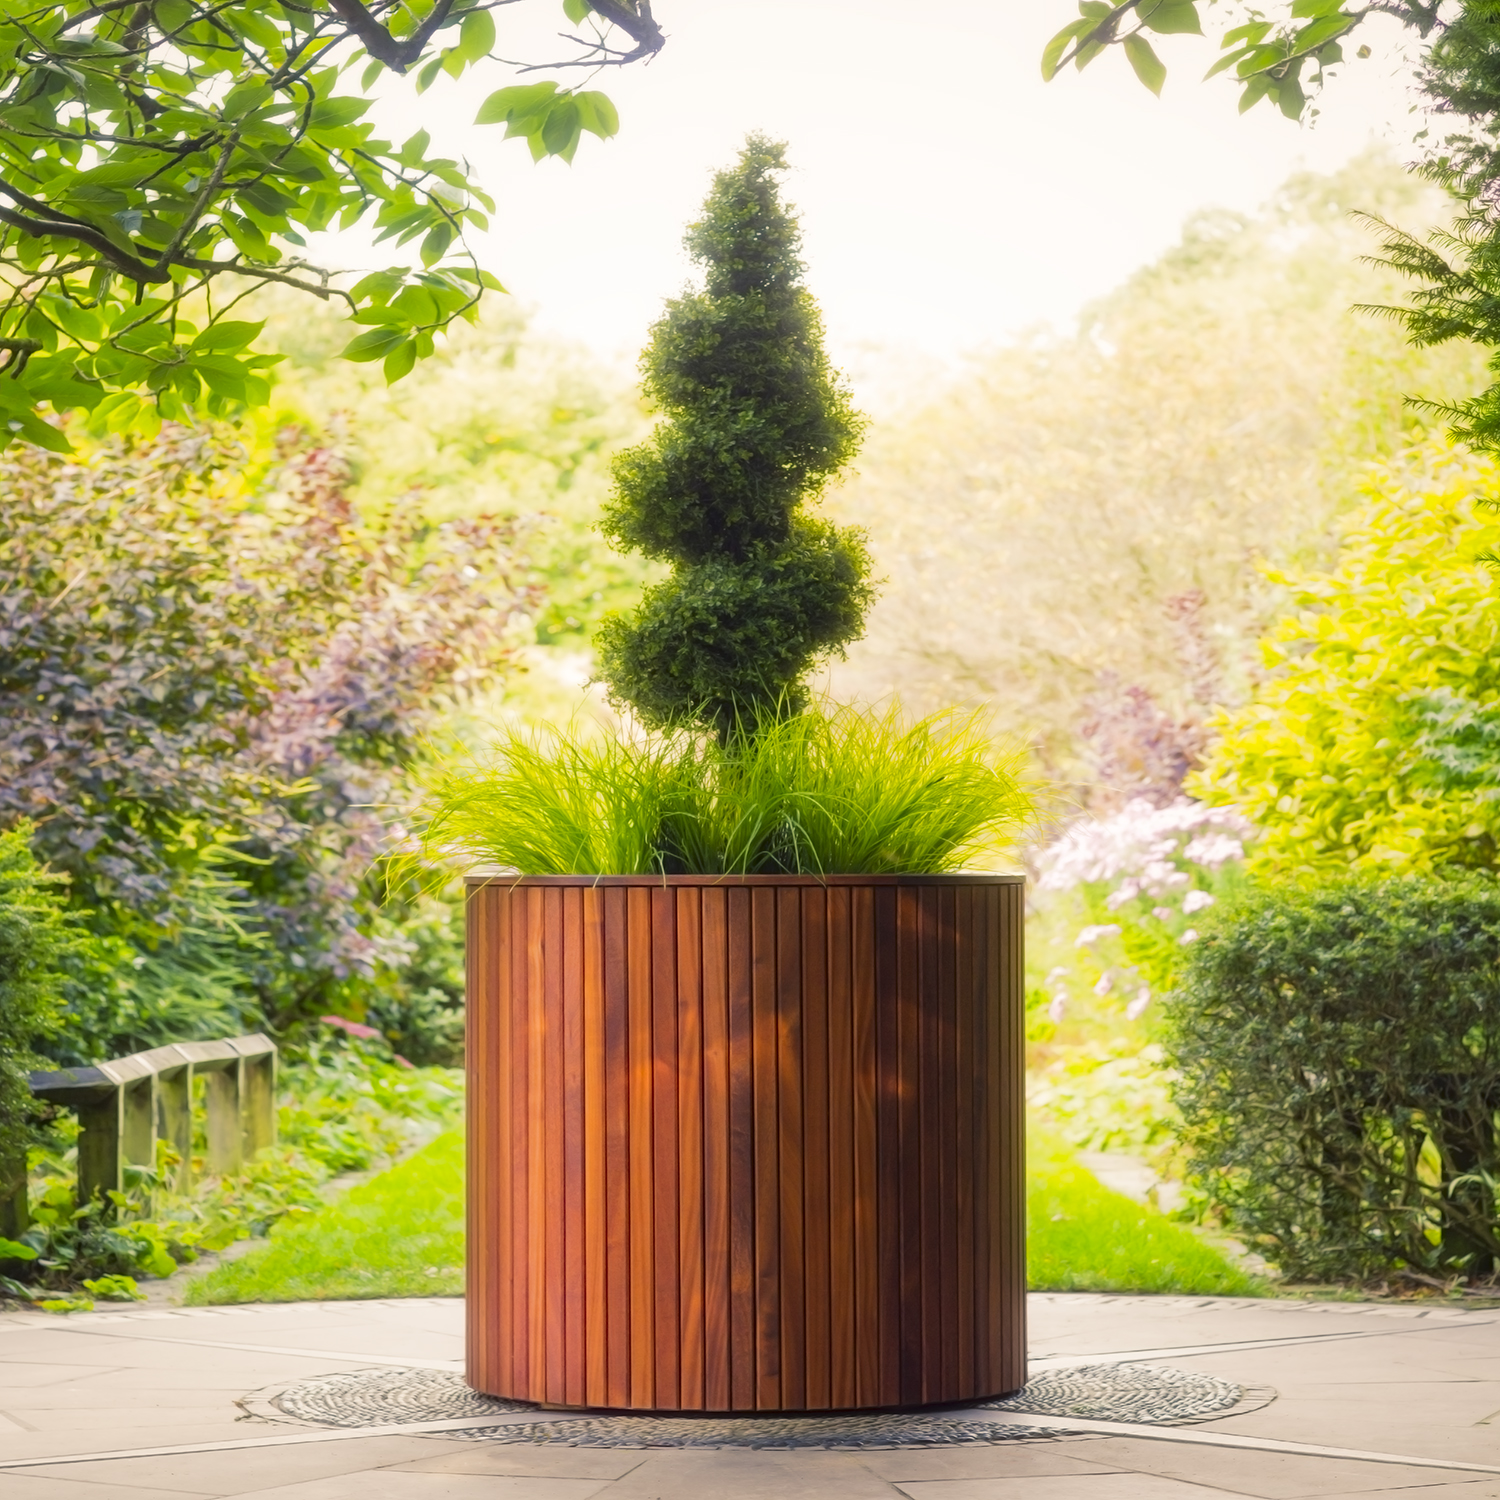 Timber Wooden Planters by Europlanters